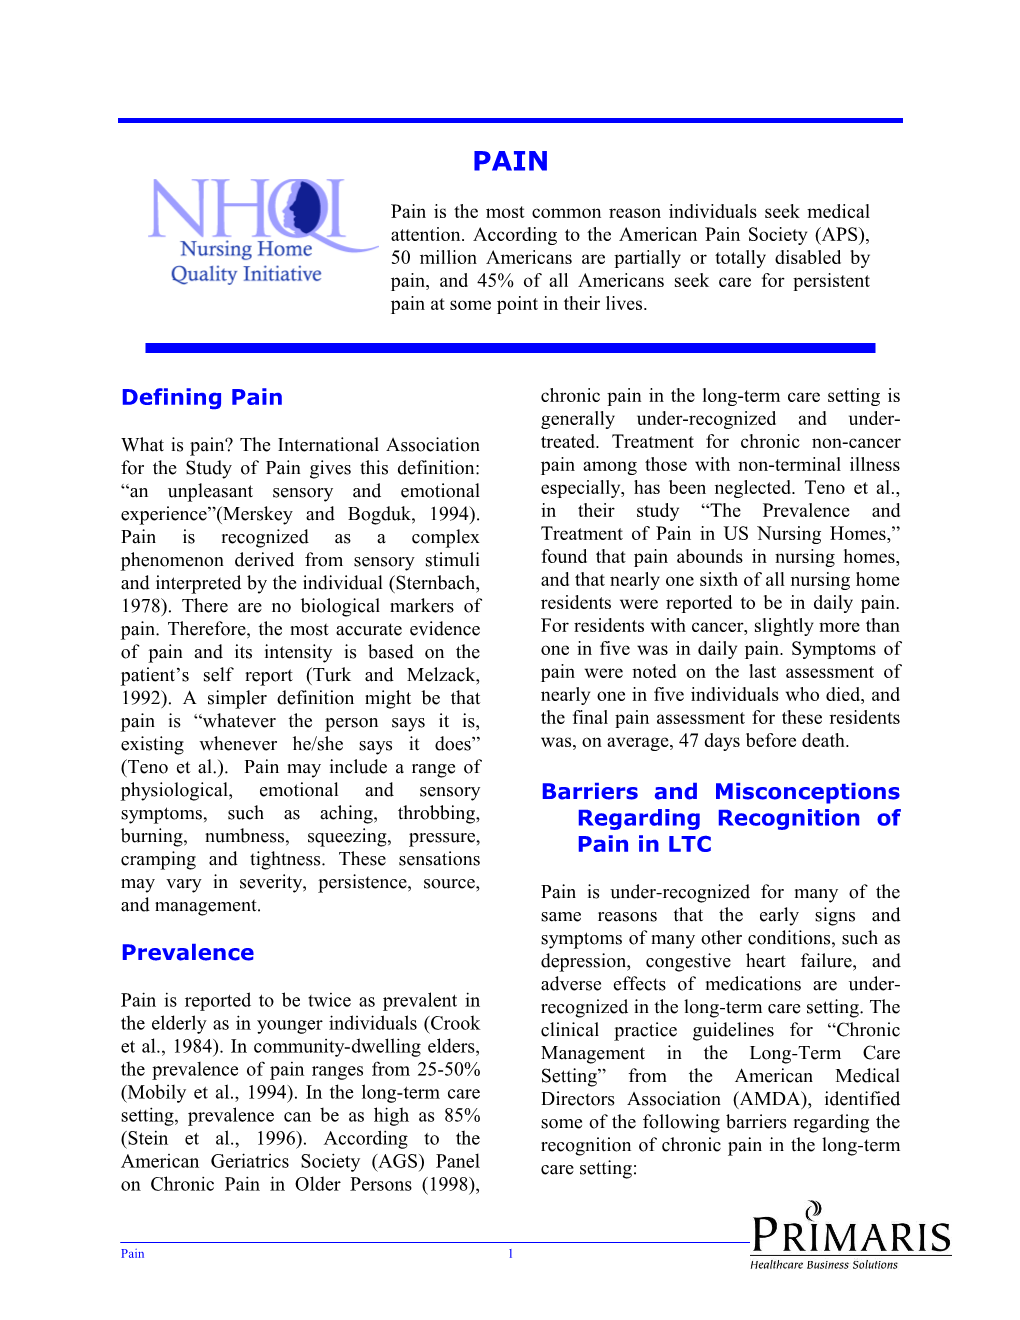 Barriers and Misconceptions Regarding Recognition of Pain in LTC